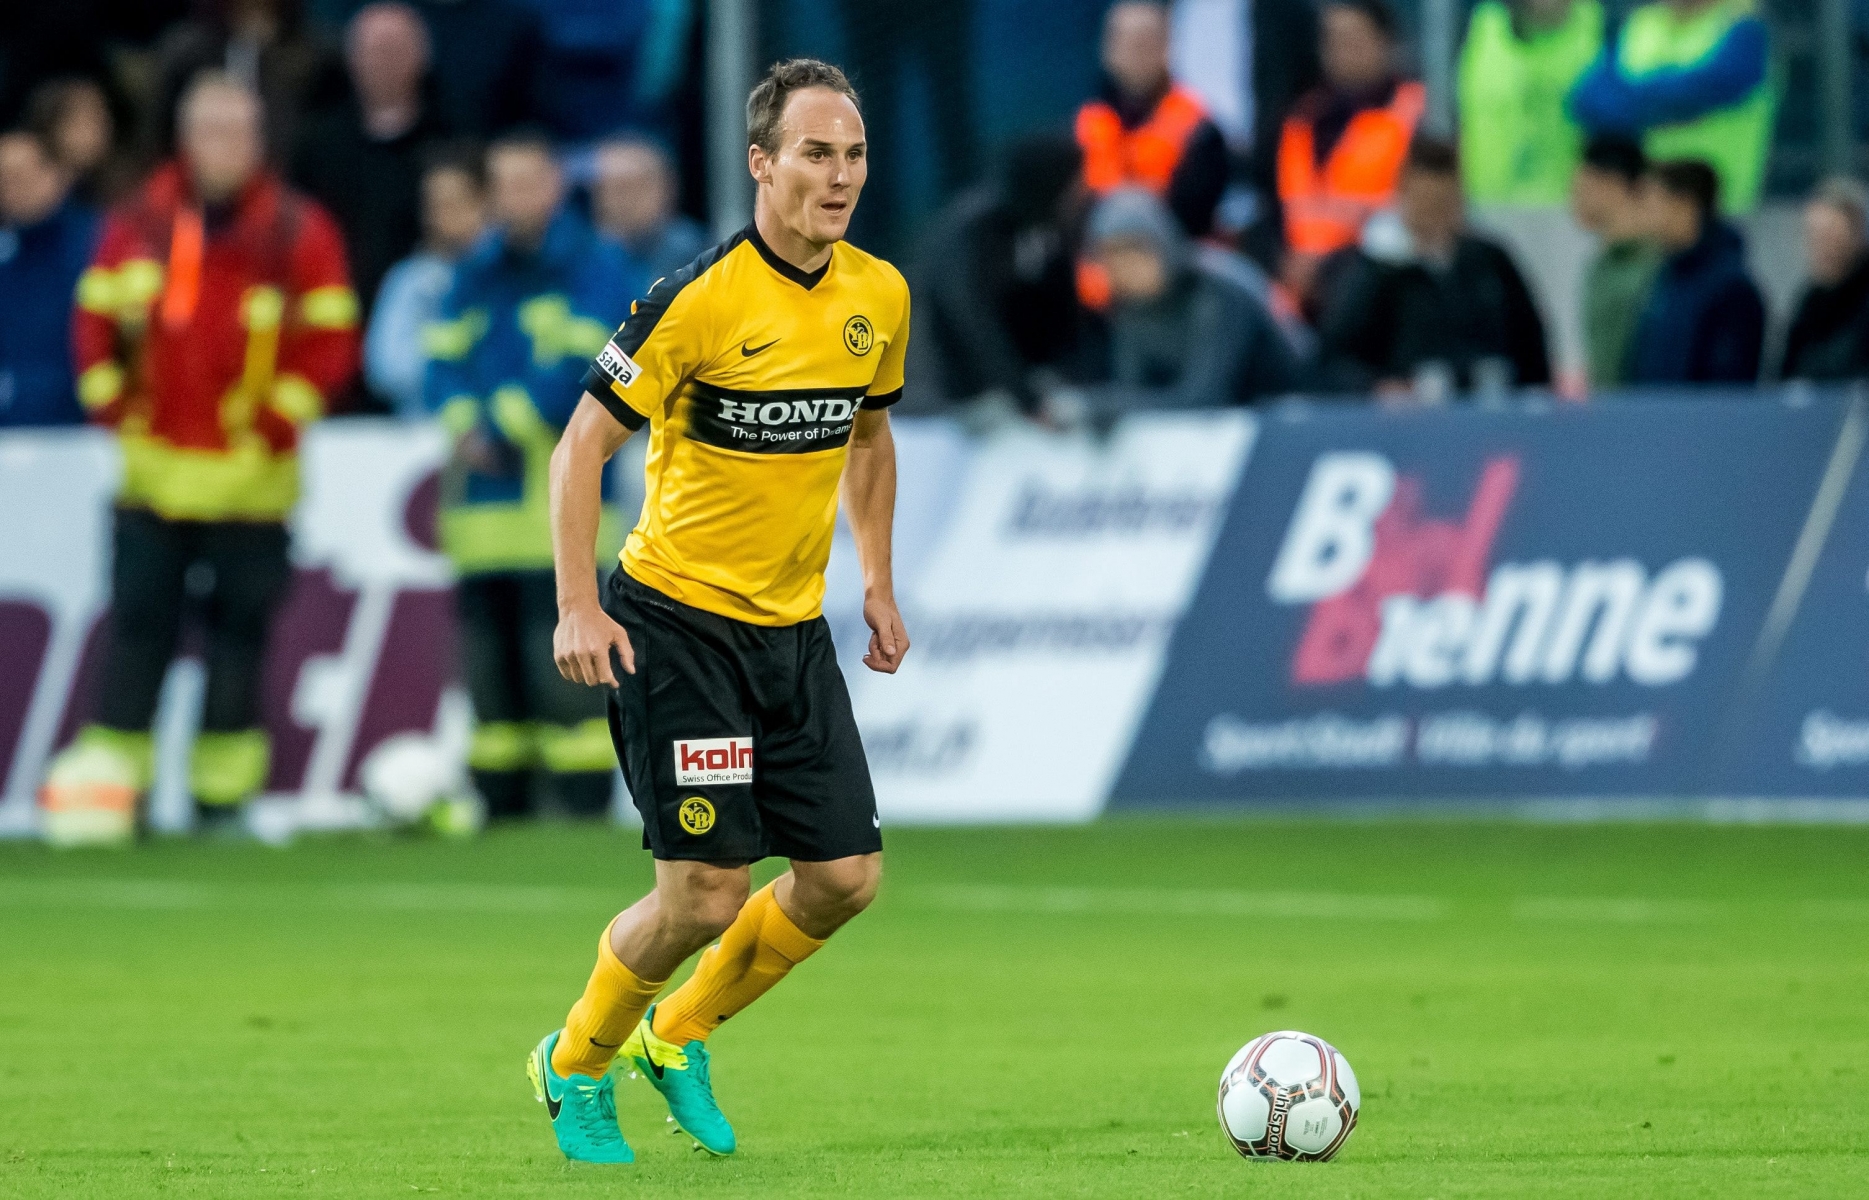 BSC Young Boys'  Steve von Bergen in action during a soccer match of the international Uhrencup tournament between Switzerland's BSC Young Boys and Germany's Borussia Moenchengladbach at the Stadium Bruehl in Grenchen, Switzerland, Wednesday, July 13, 2016.  (KEYSTONE/Thomas Hodel) SCHWEIZ FUSSBALL UHRENCUP 2016 BSC YOUNG BOYS MOENCHENGLADBACH